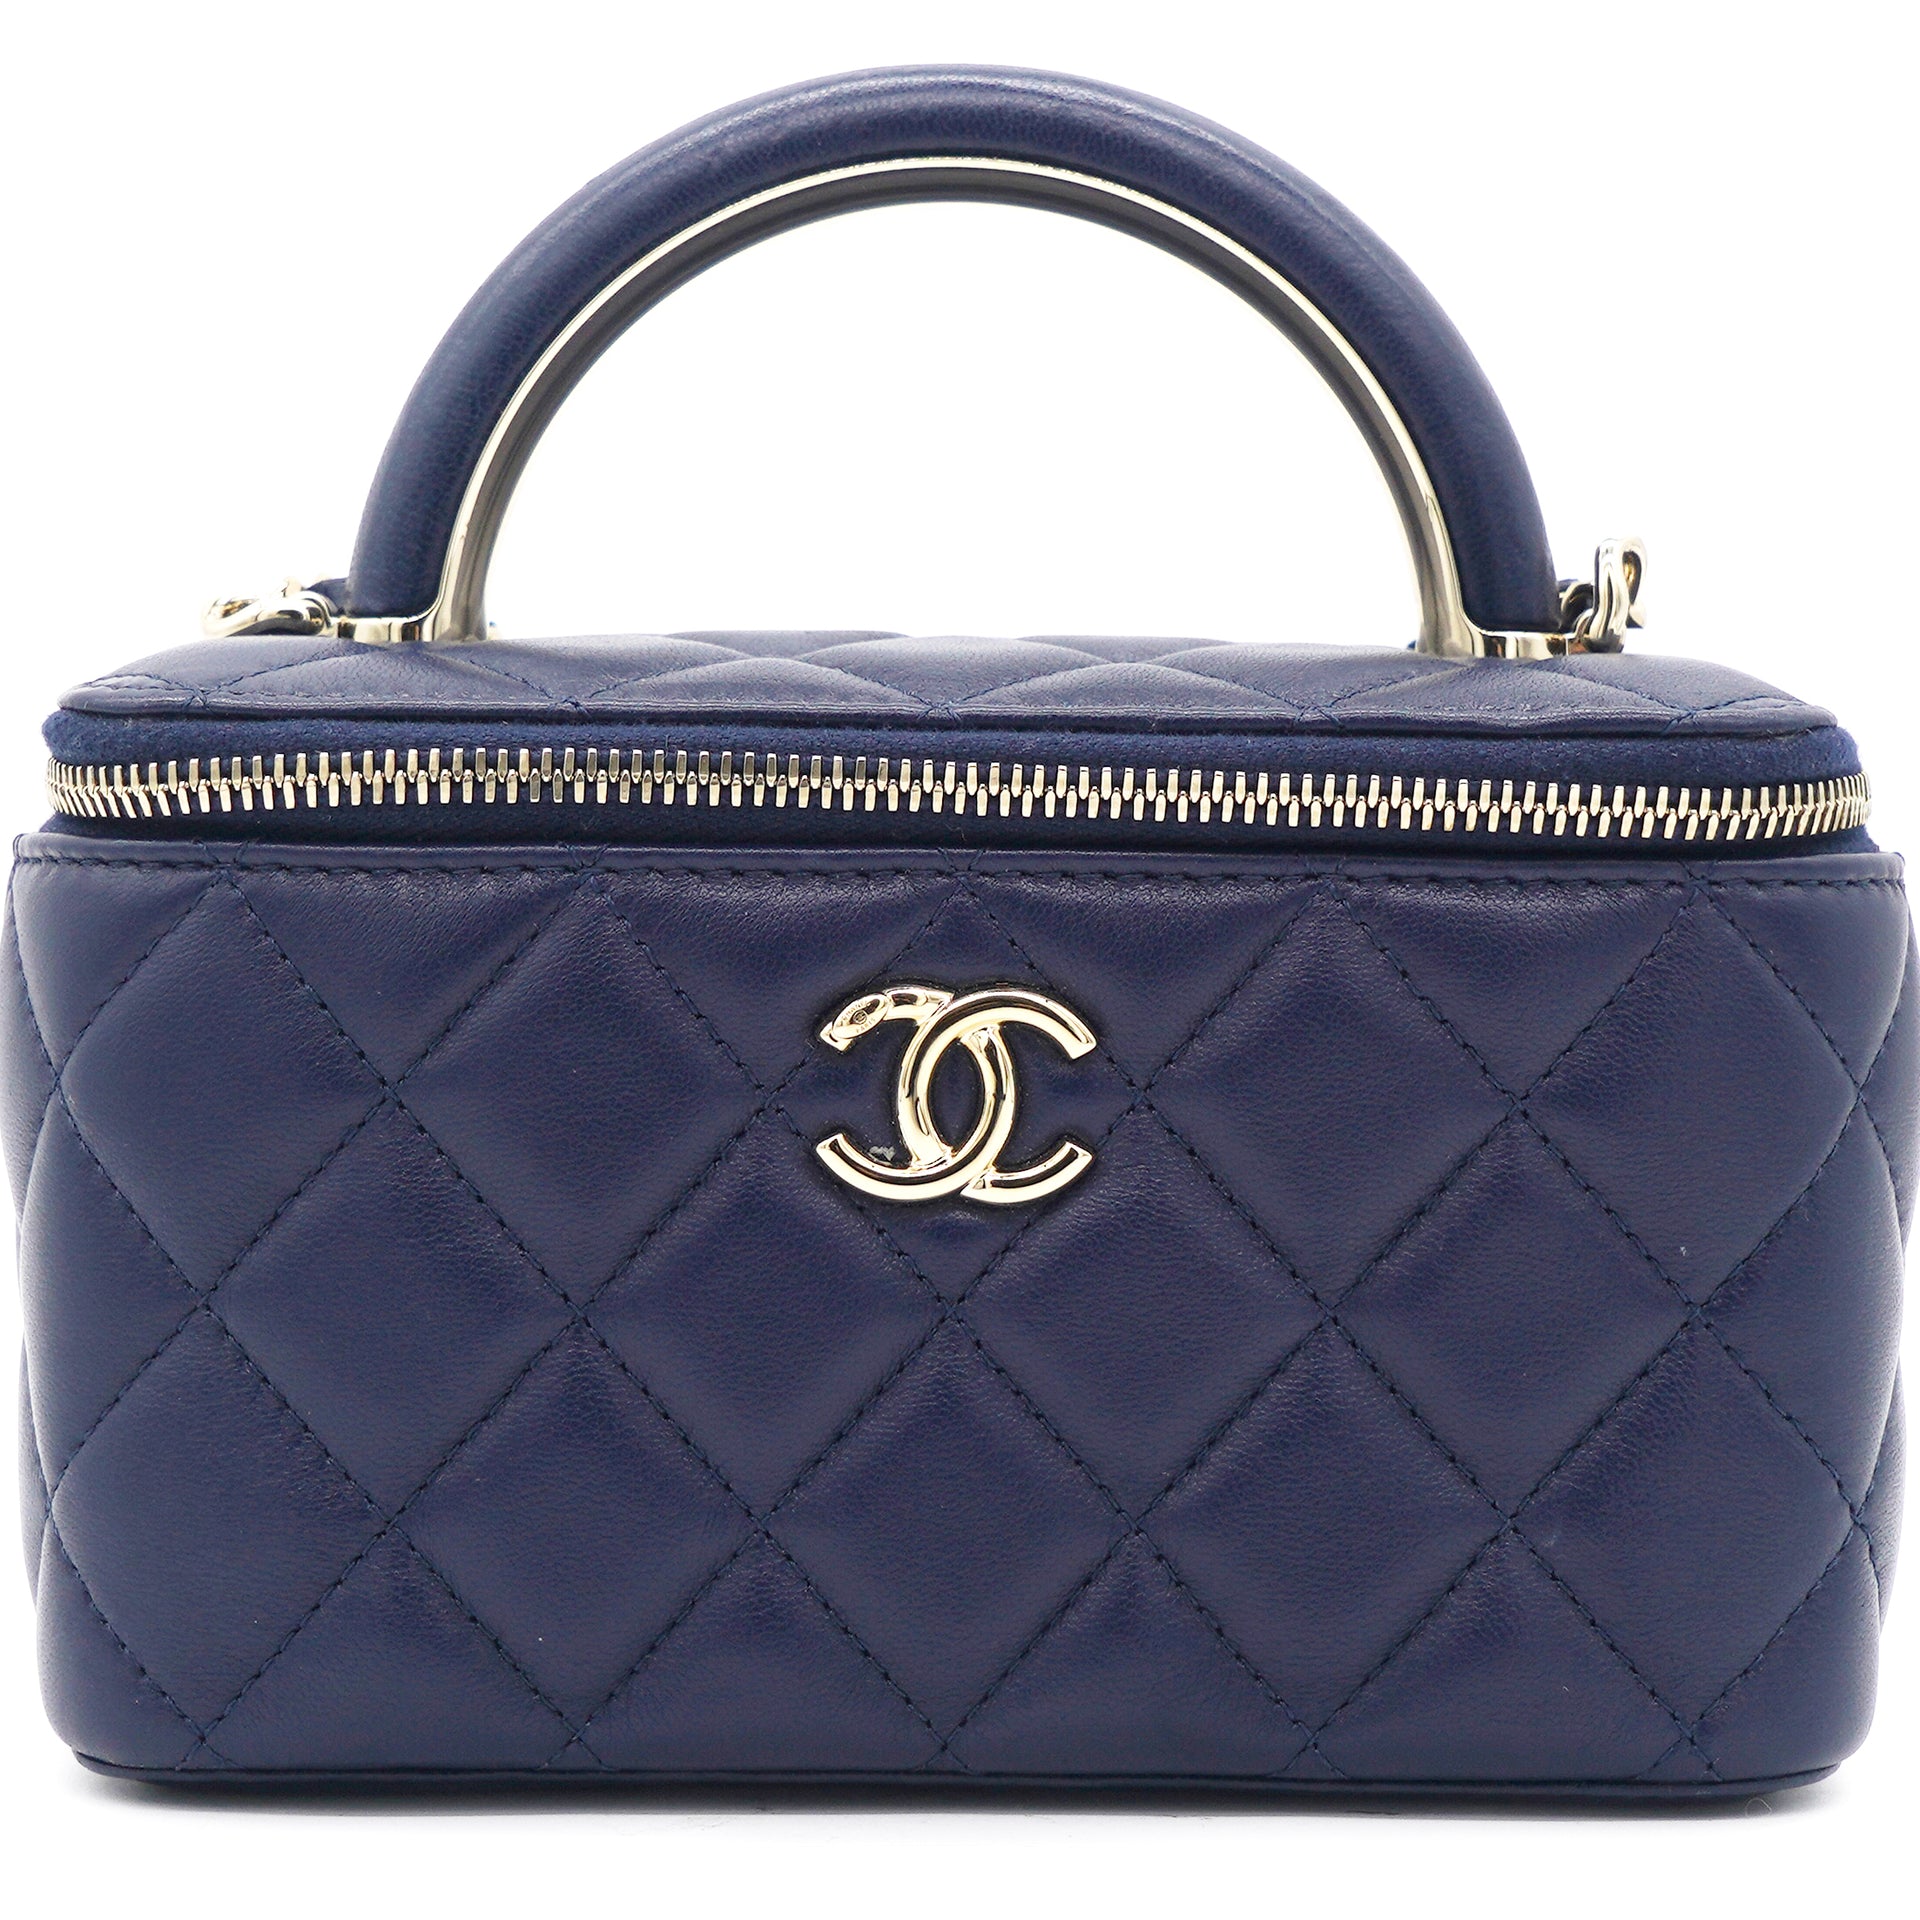 CHANEL Vanity Case Grained Calfskin Gold Metal Navy Blue  Chanel bag  Bags Fashion bags